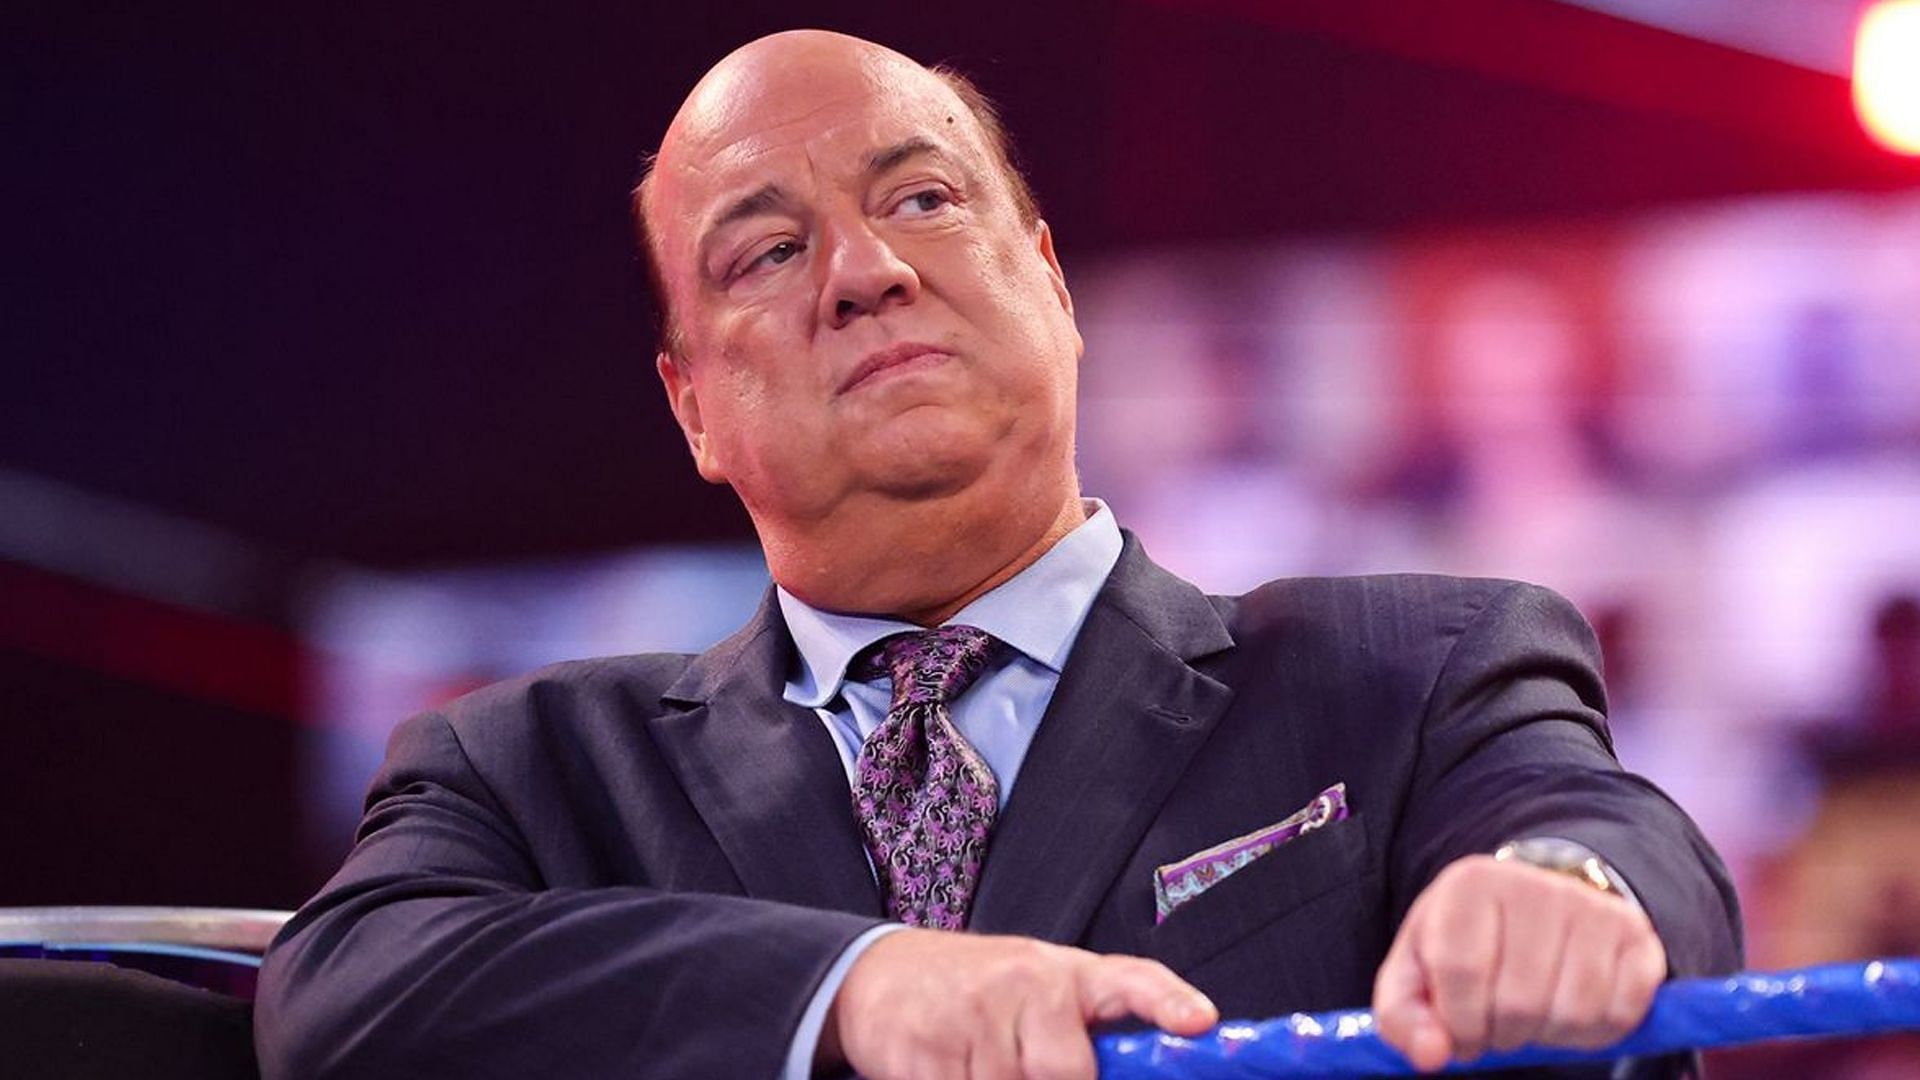 Paul Heyman is the founder of ECW promotion